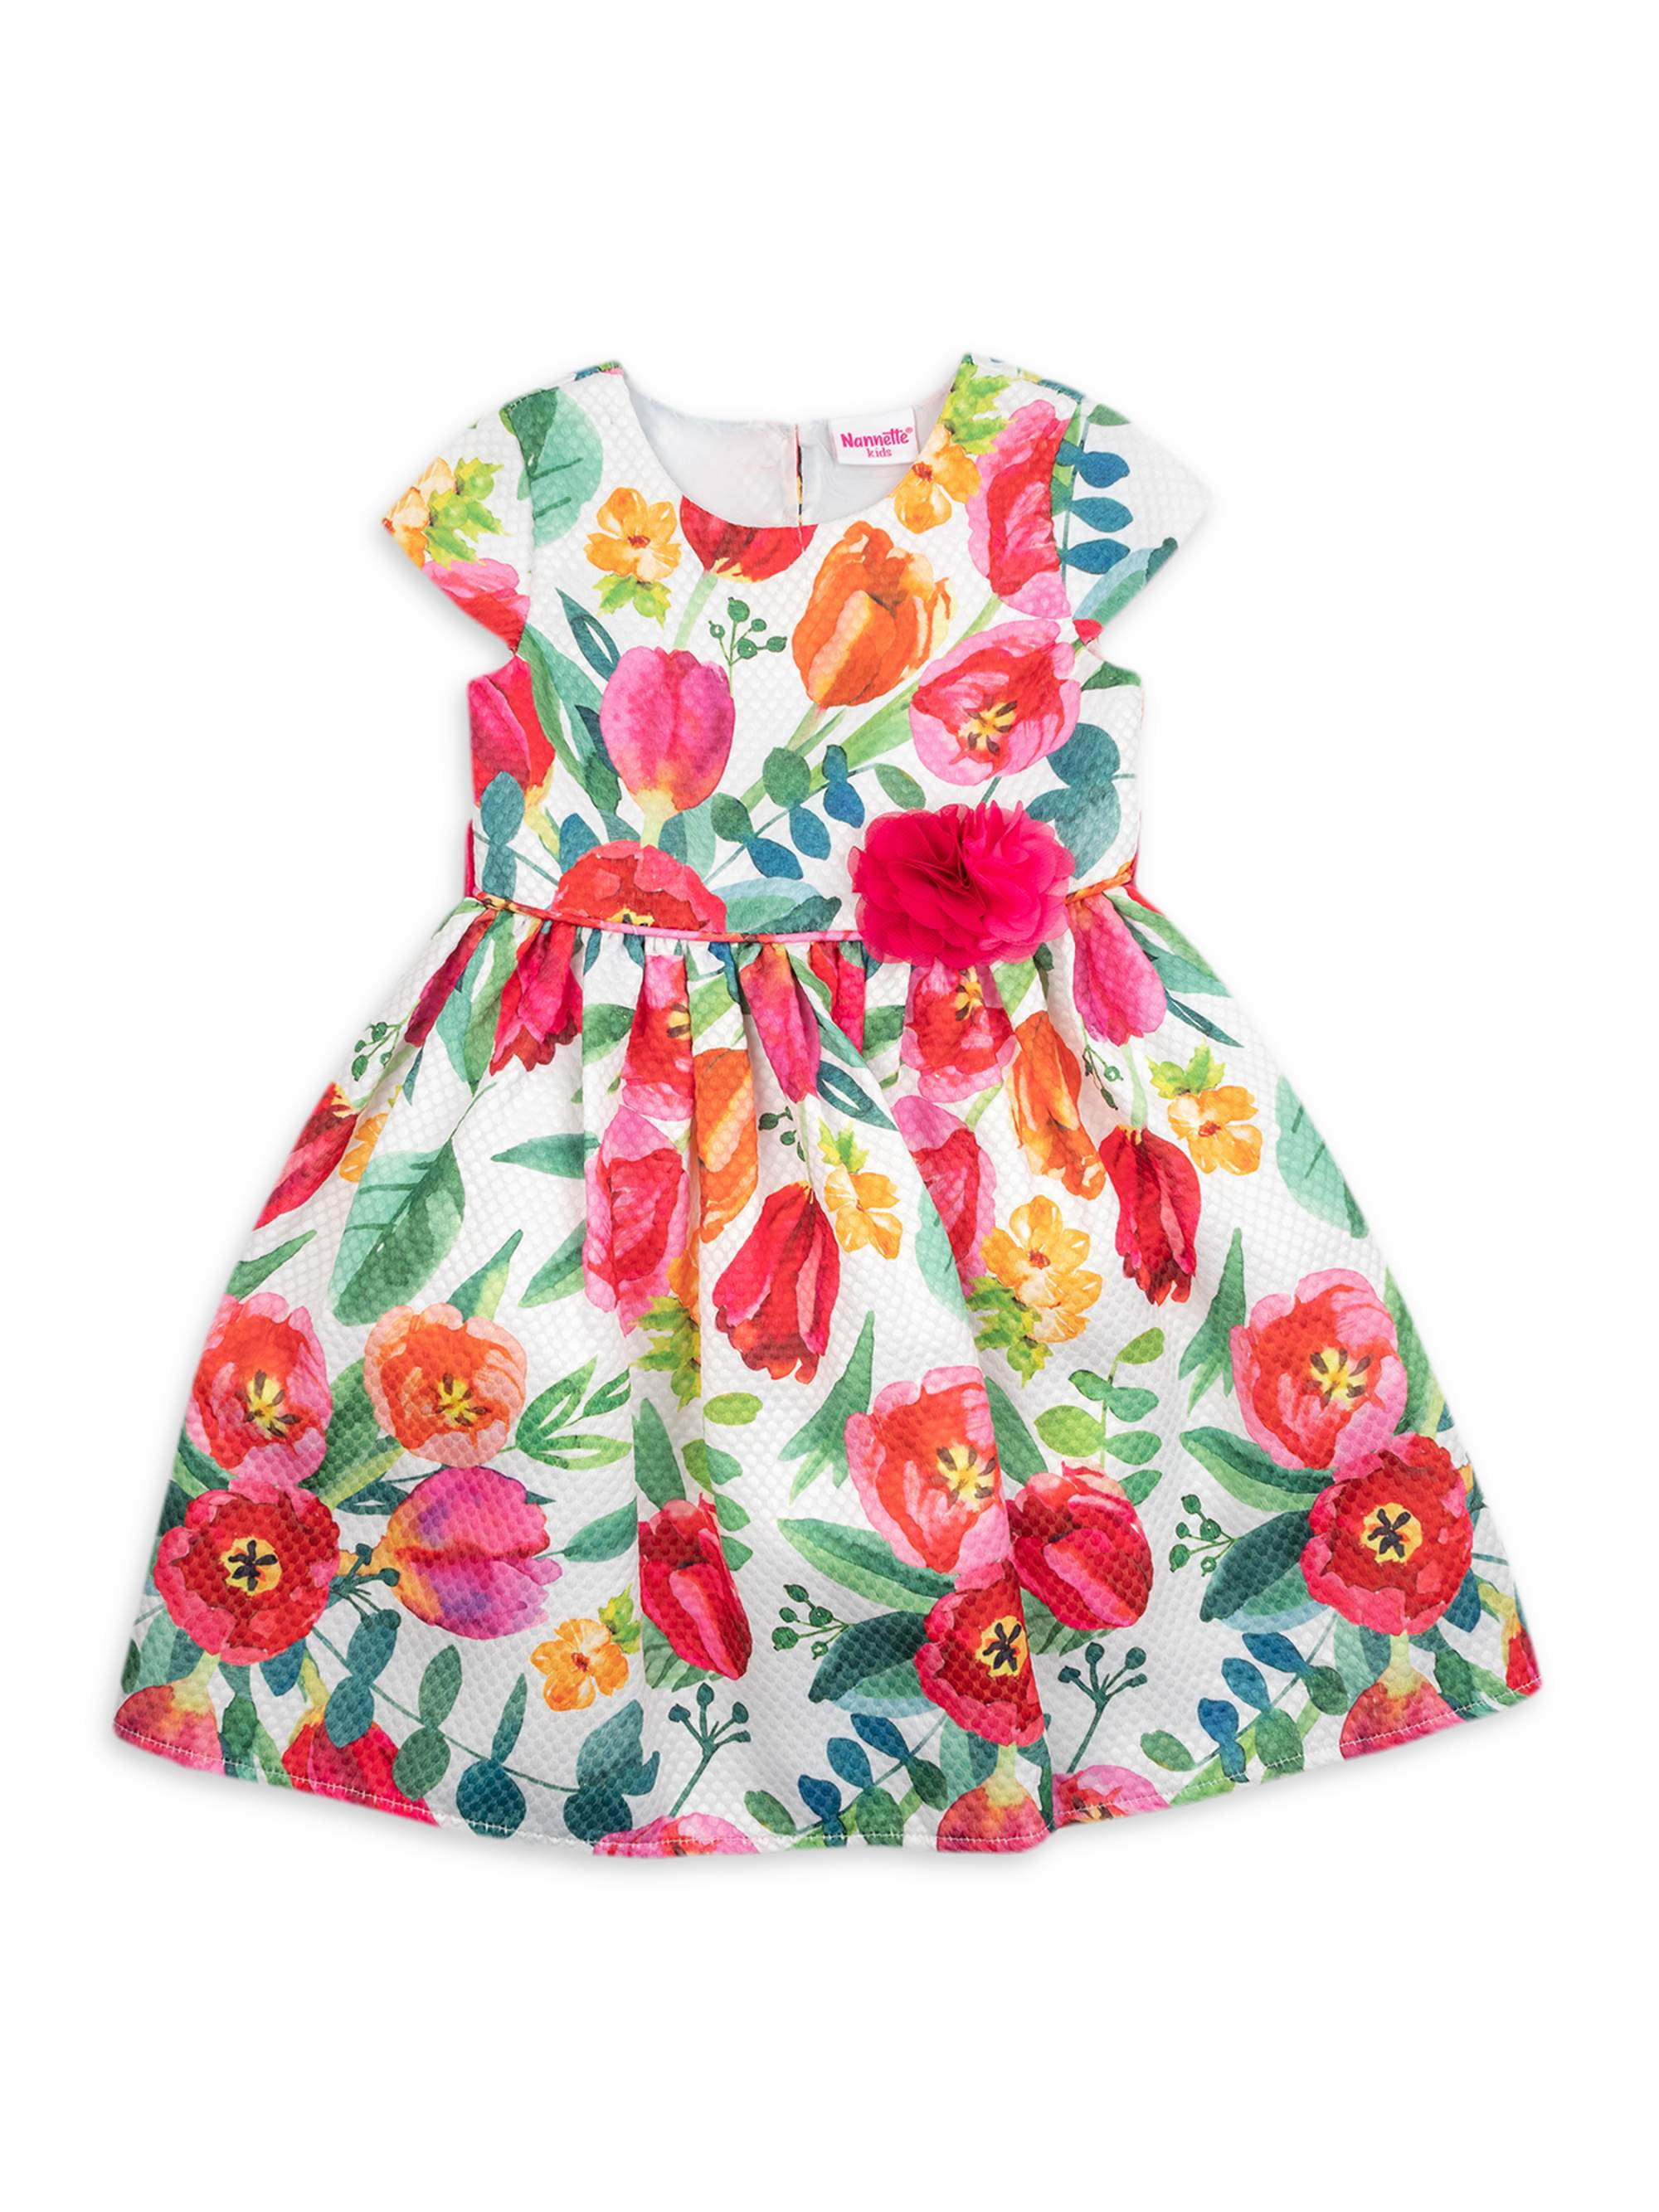 Nannette Girls 4-6X Printed Pique Easter Dressy Dress With Back Heart ...